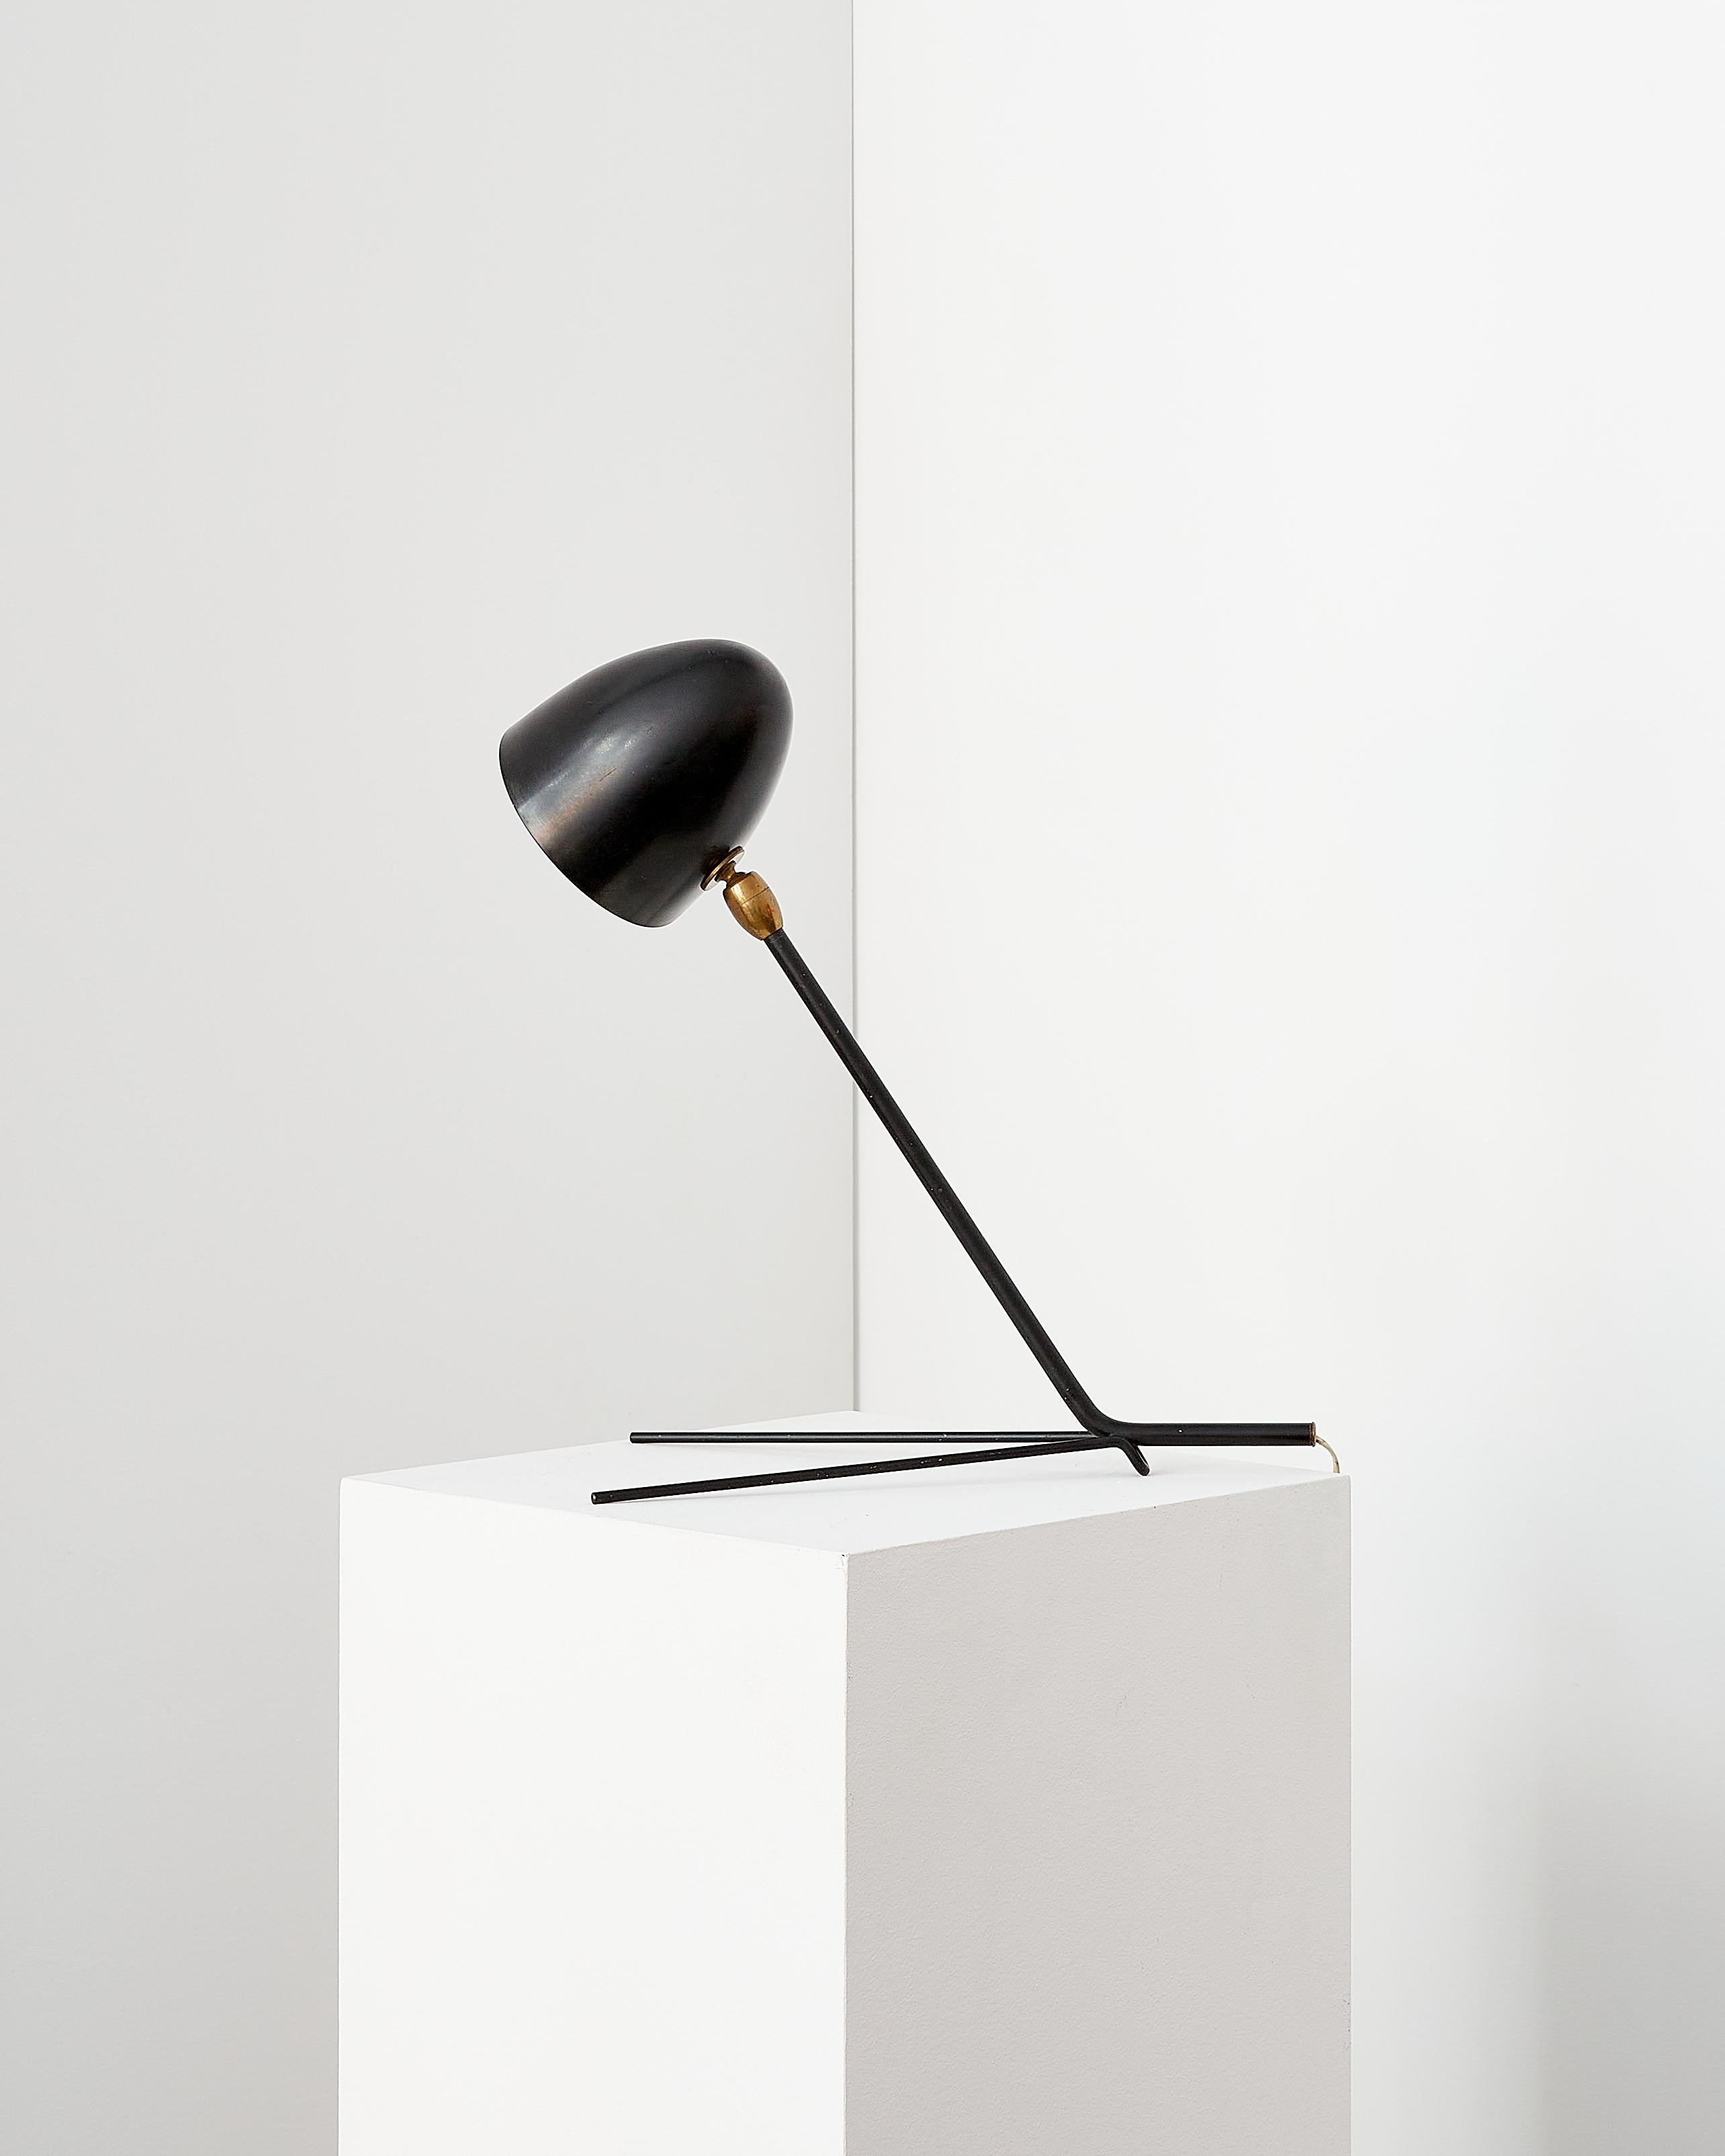 Original Serge Mouille Cocotte table lamp.

Designed in 1957. Completely original, down to the bullet shaped switch, wiring and electrics.

The Cocotte lamp was originally designed for the bedrooms in a young workers’ center in Fonteney. A ring